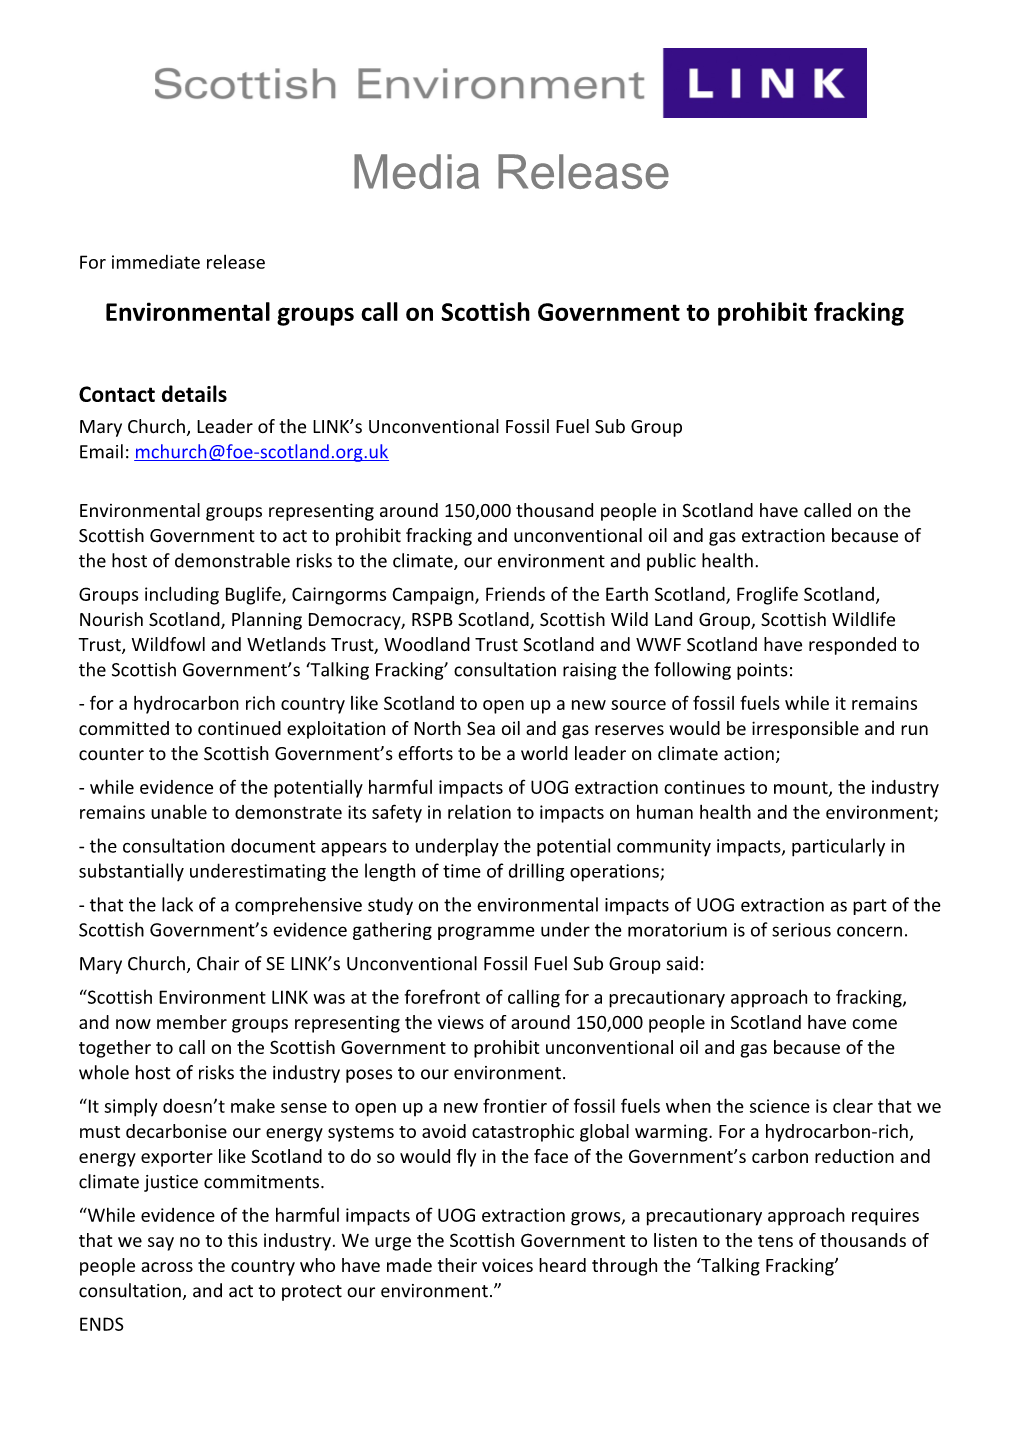 Environmental Groups Call on Scottish Government to Prohibit Fracking